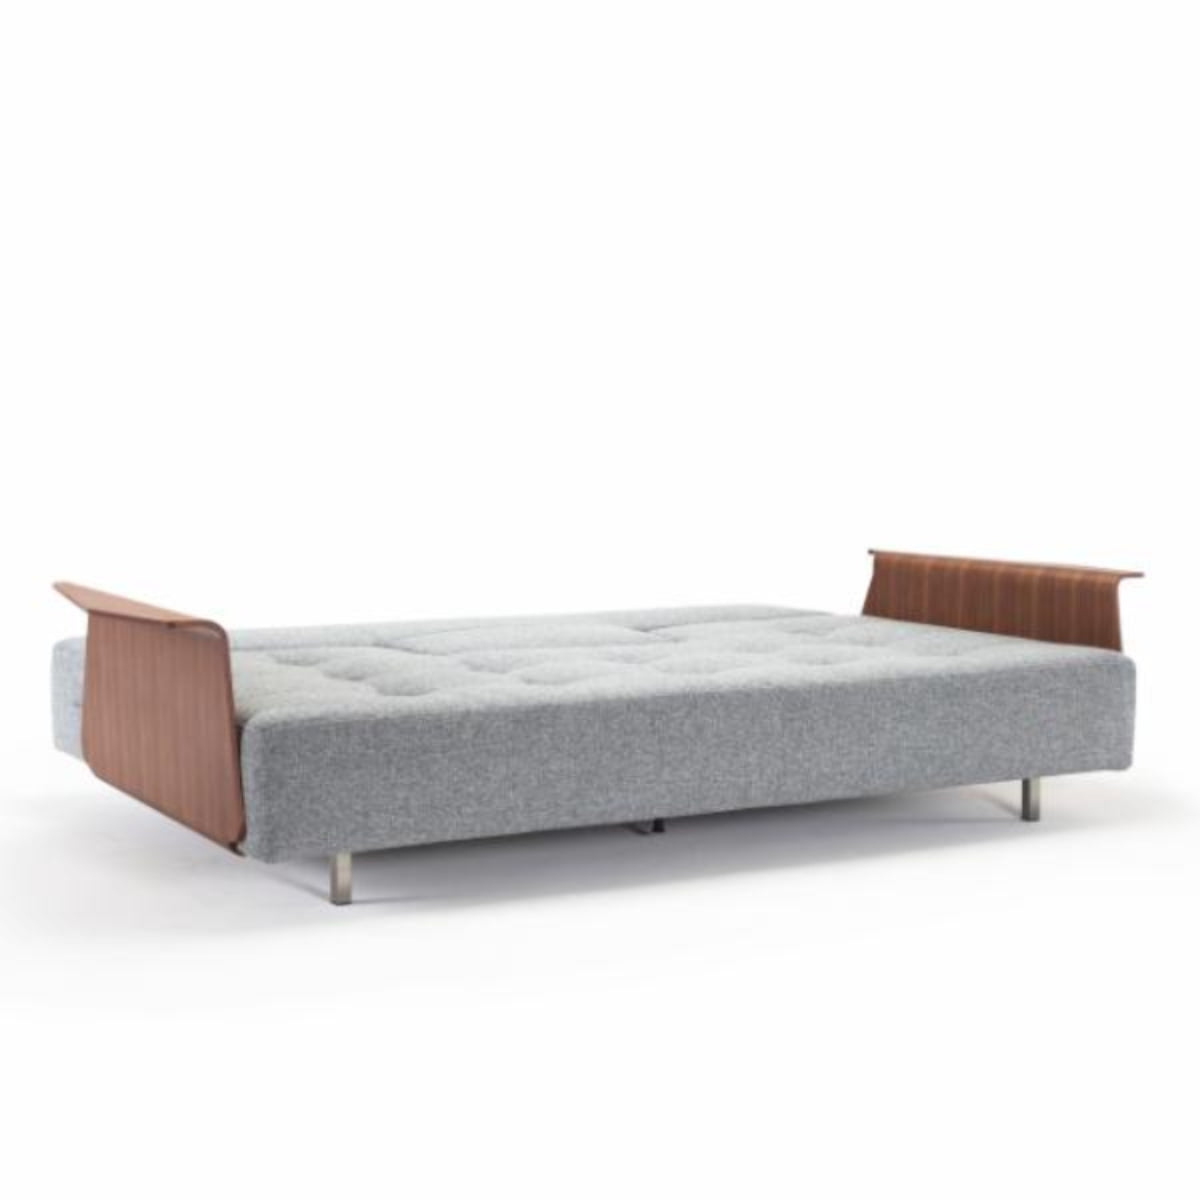 Long Horn D.E. Sofa Bed With Arms Daybed INNOVATION     Four Hands, Burke Decor, Mid Century Modern Furniture, Old Bones Furniture Company, Old Bones Co, Modern Mid Century, Designer Furniture, https://www.oldbonesco.com/